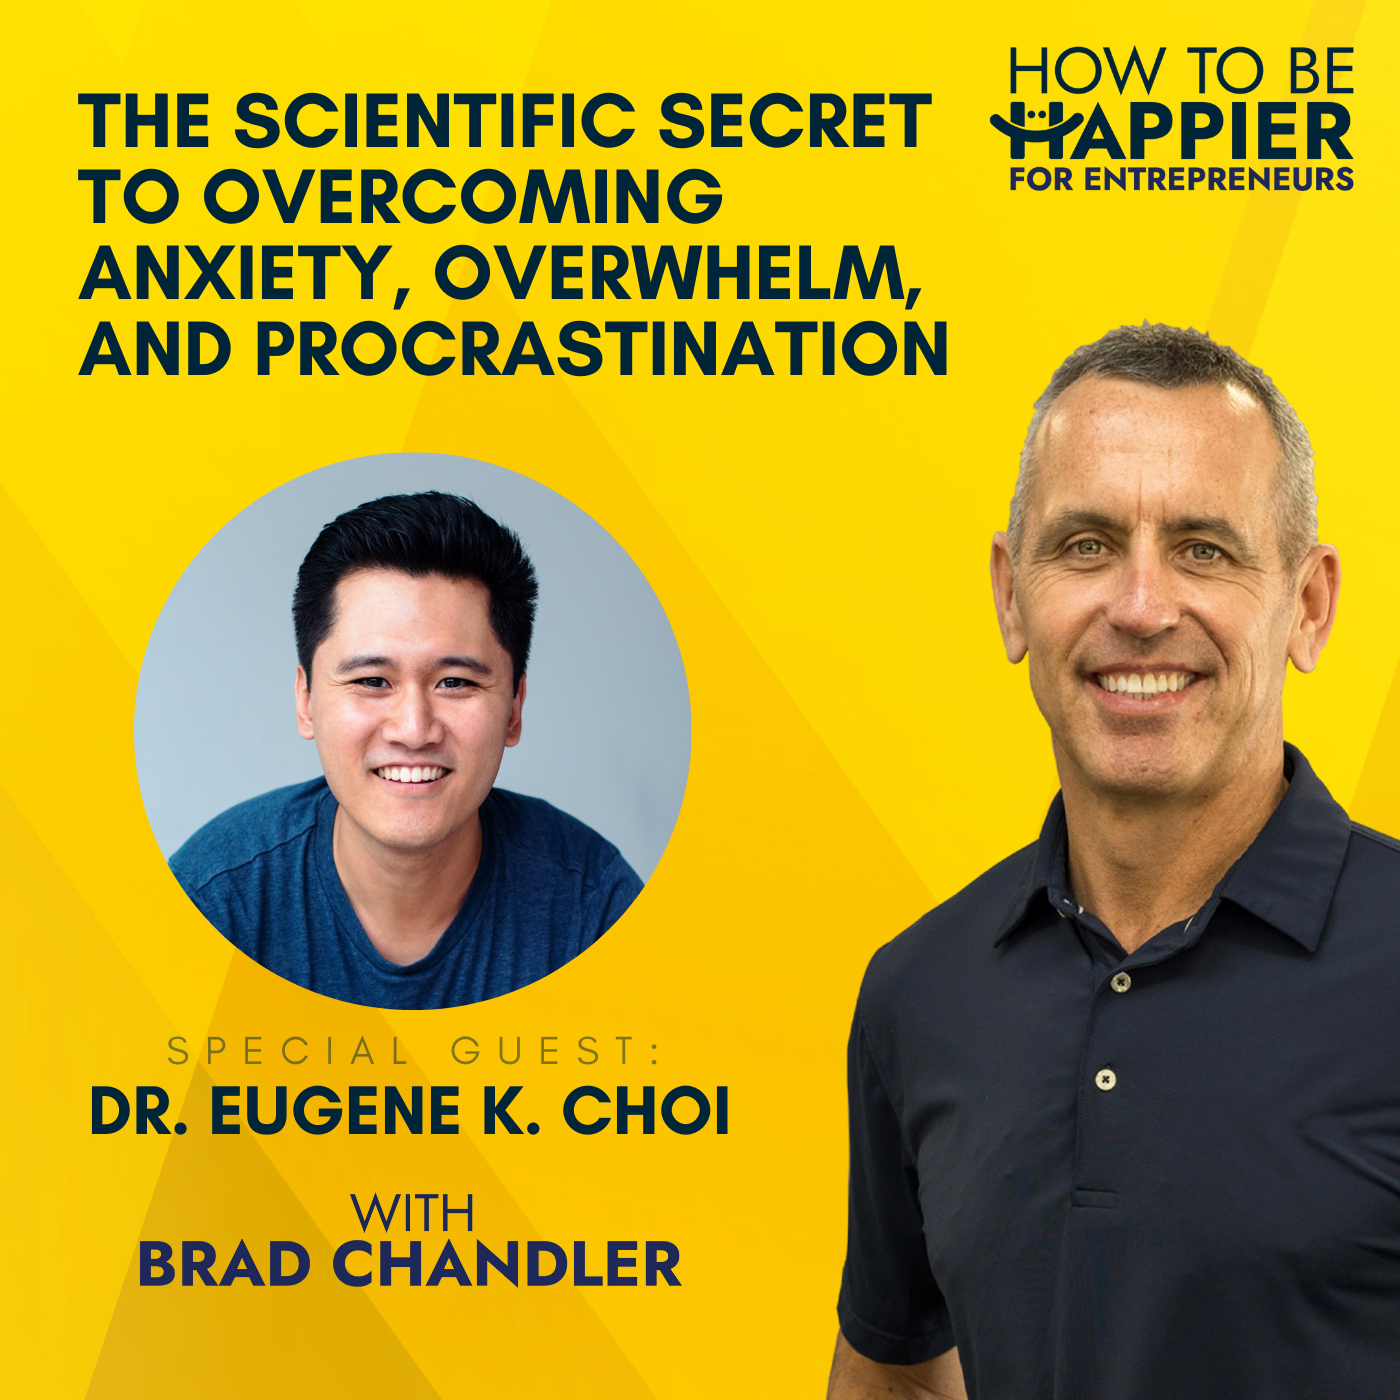 EP04: The Scientific Secret to Overcoming Anxiety, Overwhelm, and Procrastination with Dr. Eugene K. Choi